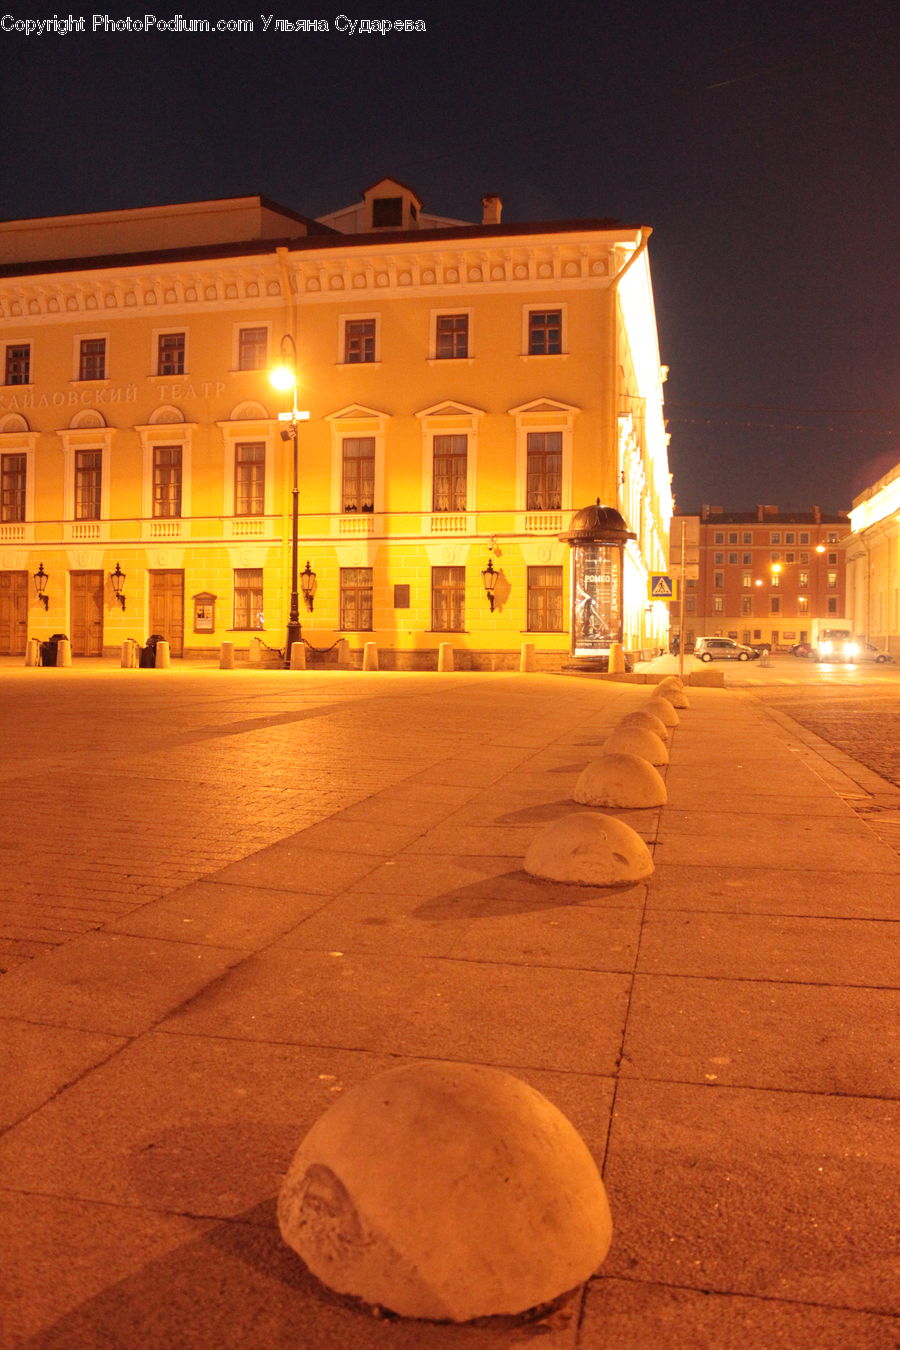 Pavement, Architecture, Downtown, Plaza, Town Square, Night, Outdoors